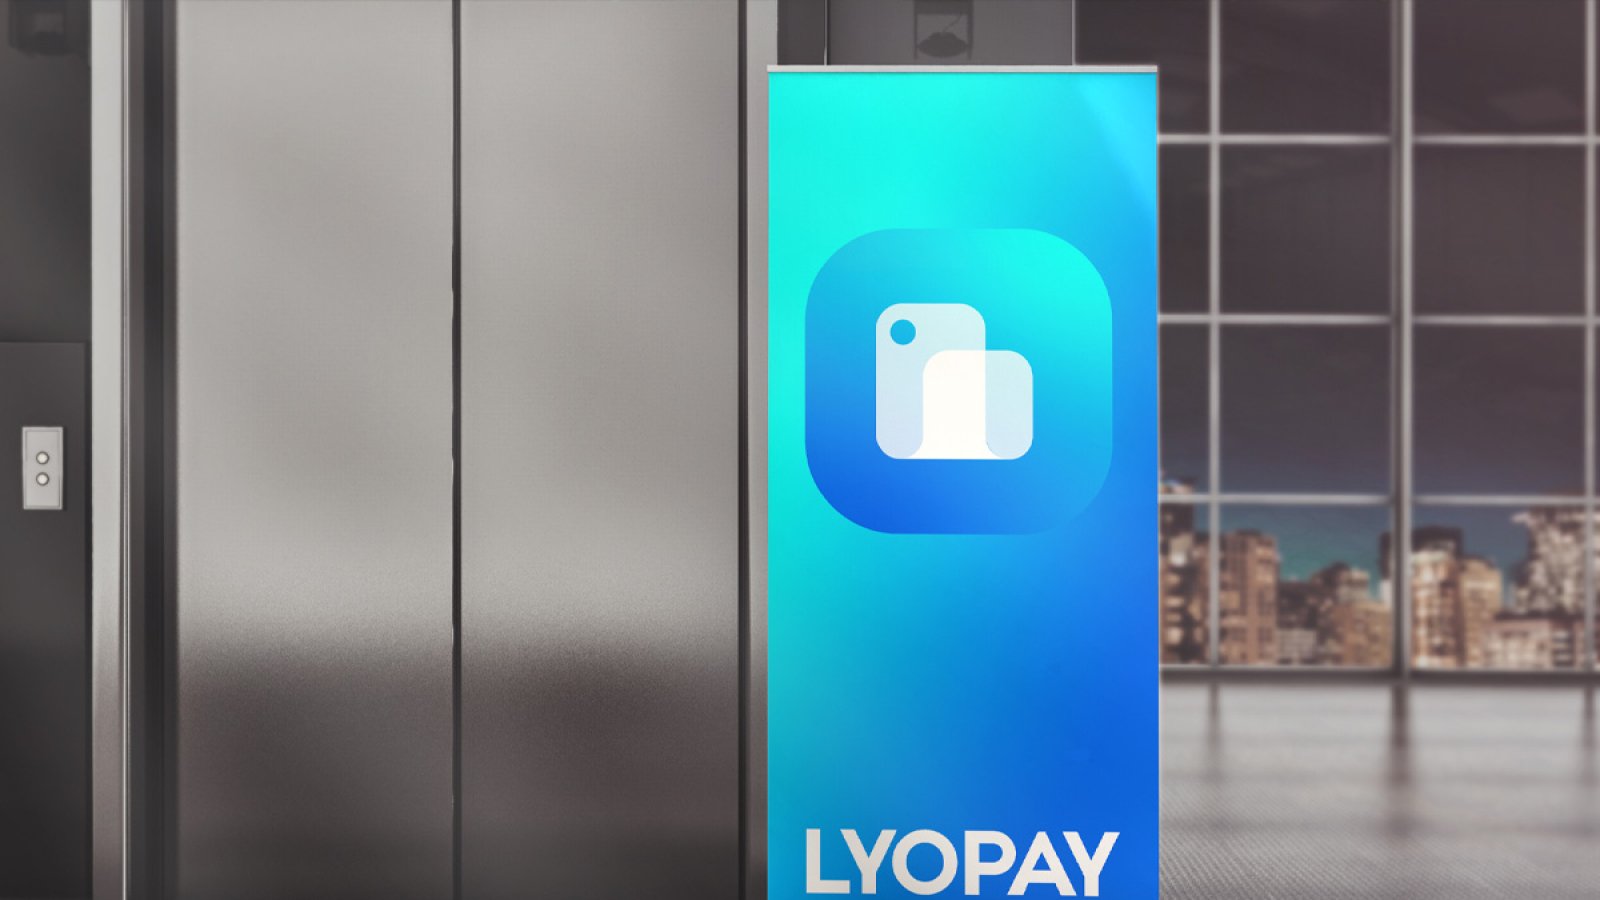 Lyopay launches the First All in One Crypto App with Full Services